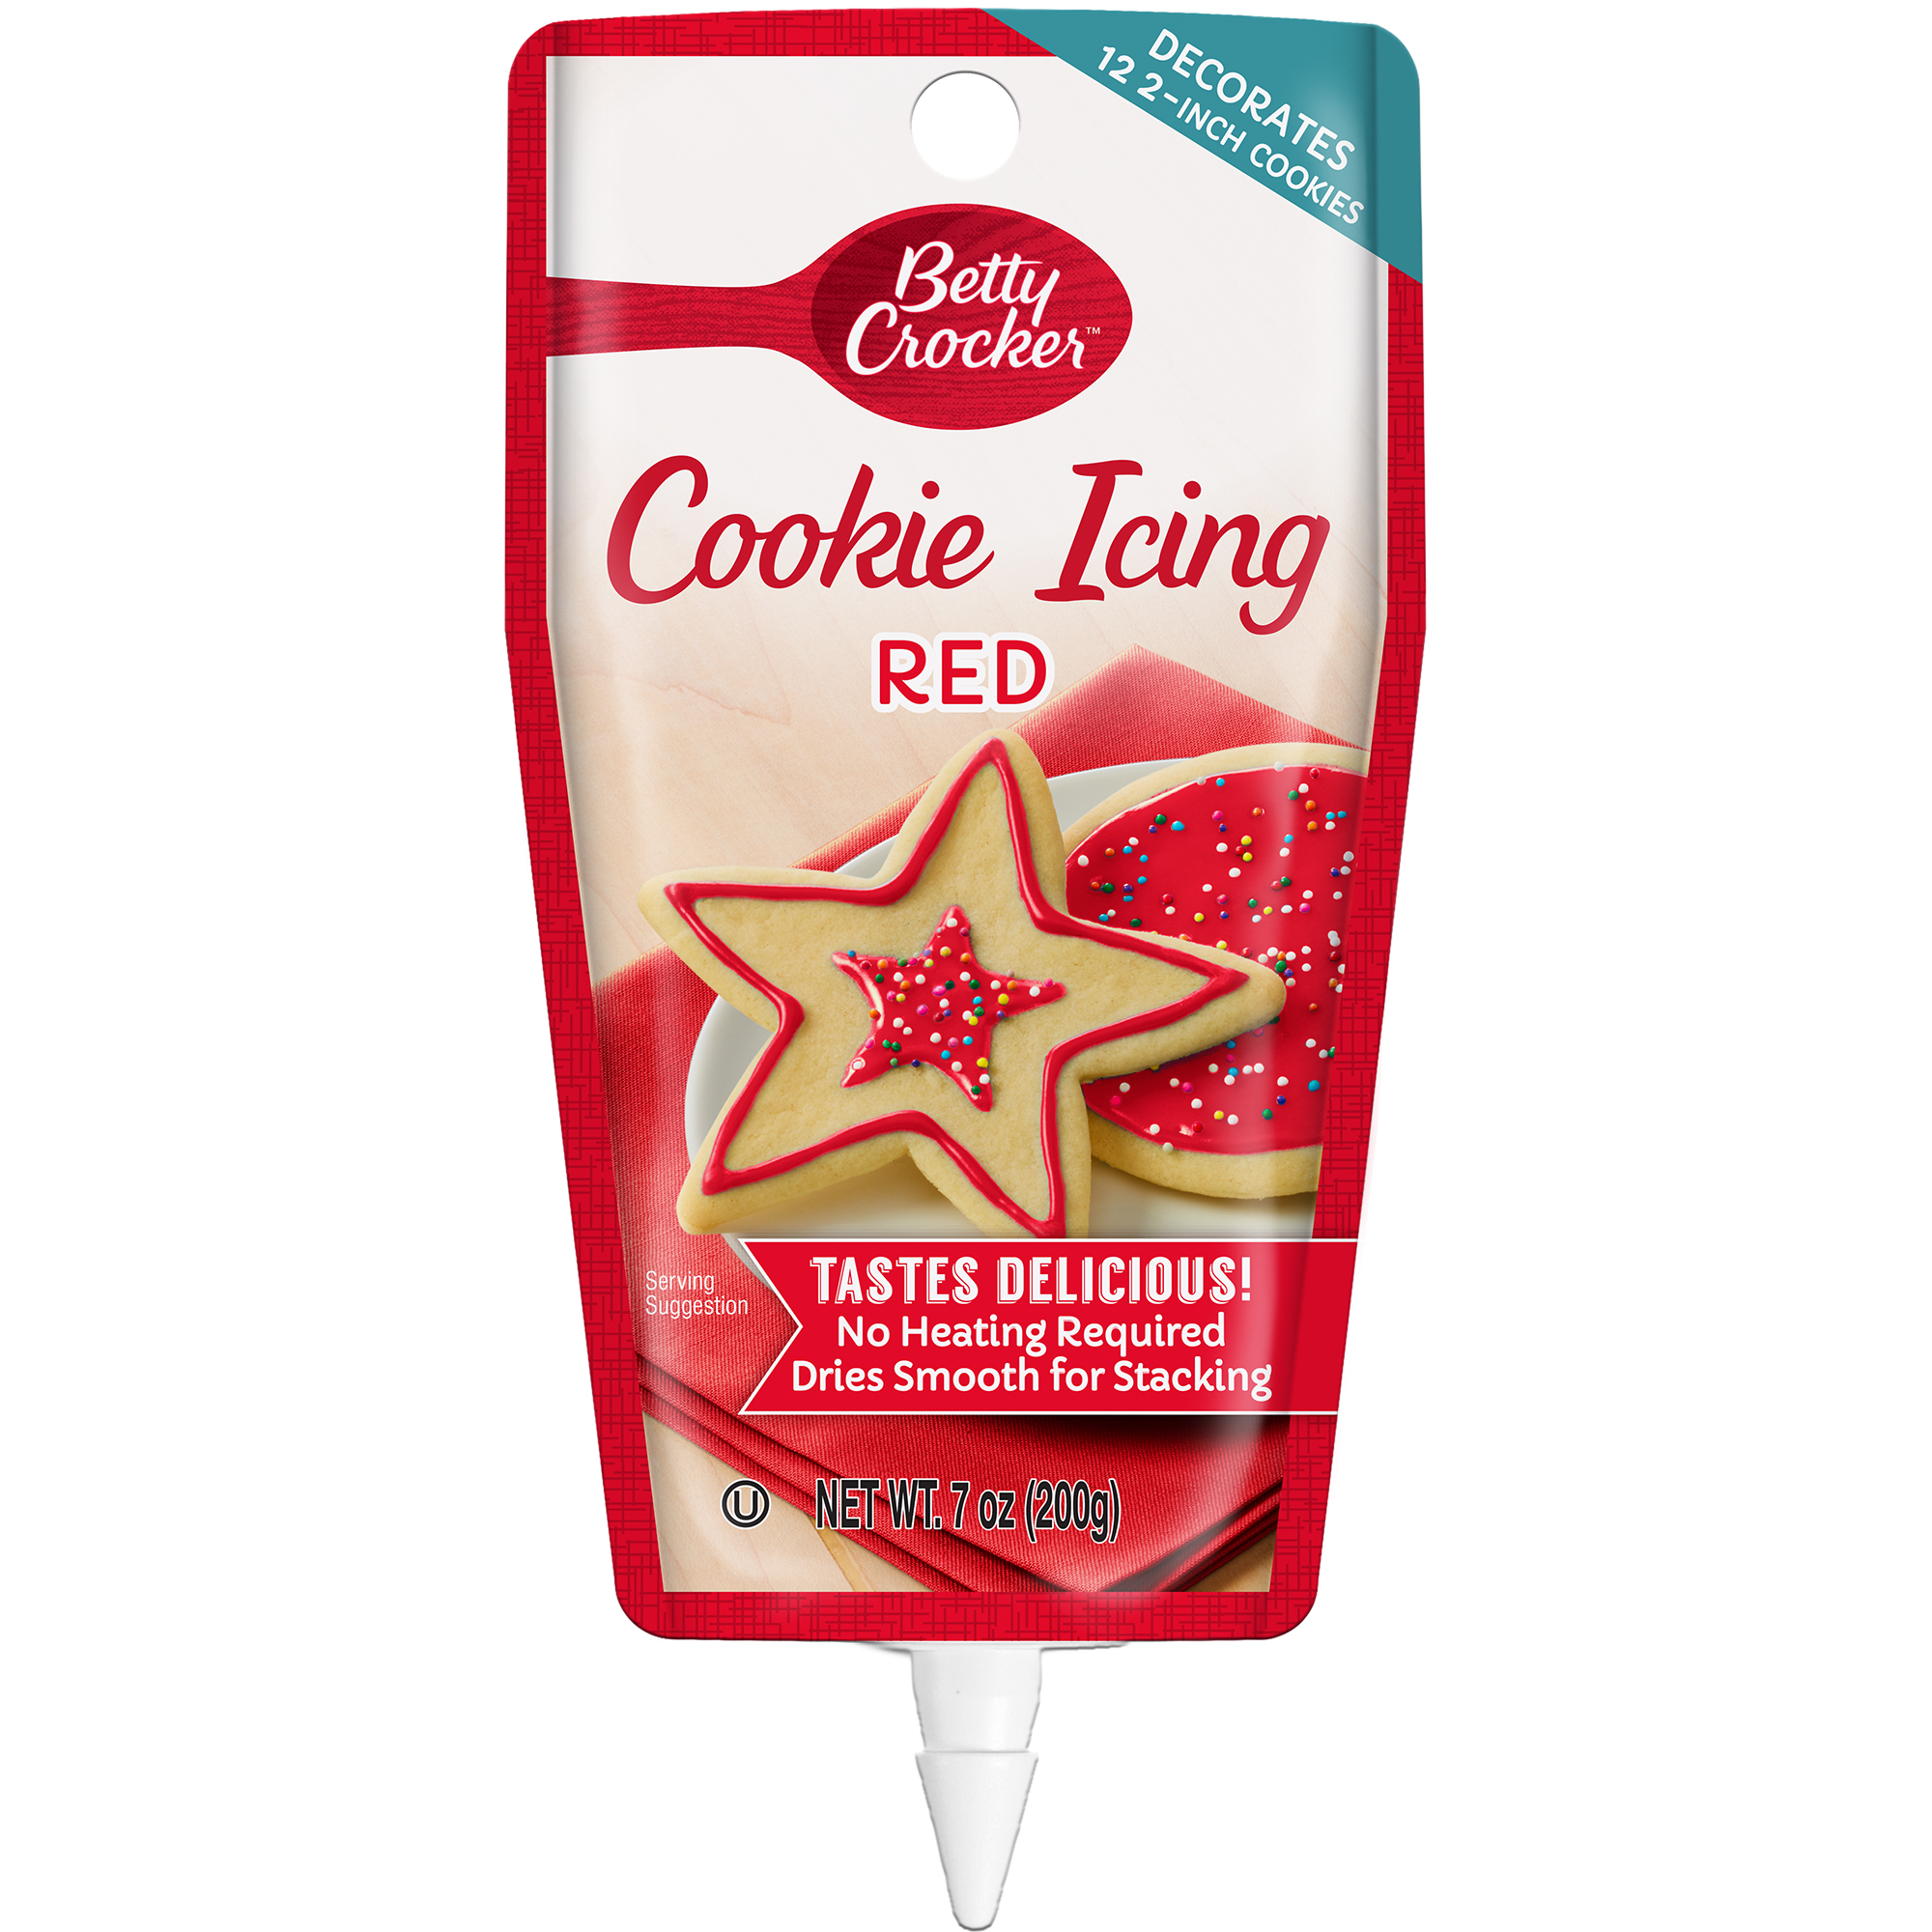 Betty Crocker Red Cookie Decorating Icing, Vanilla Flavor, 7 Ounce Pouch - image 1 of 5